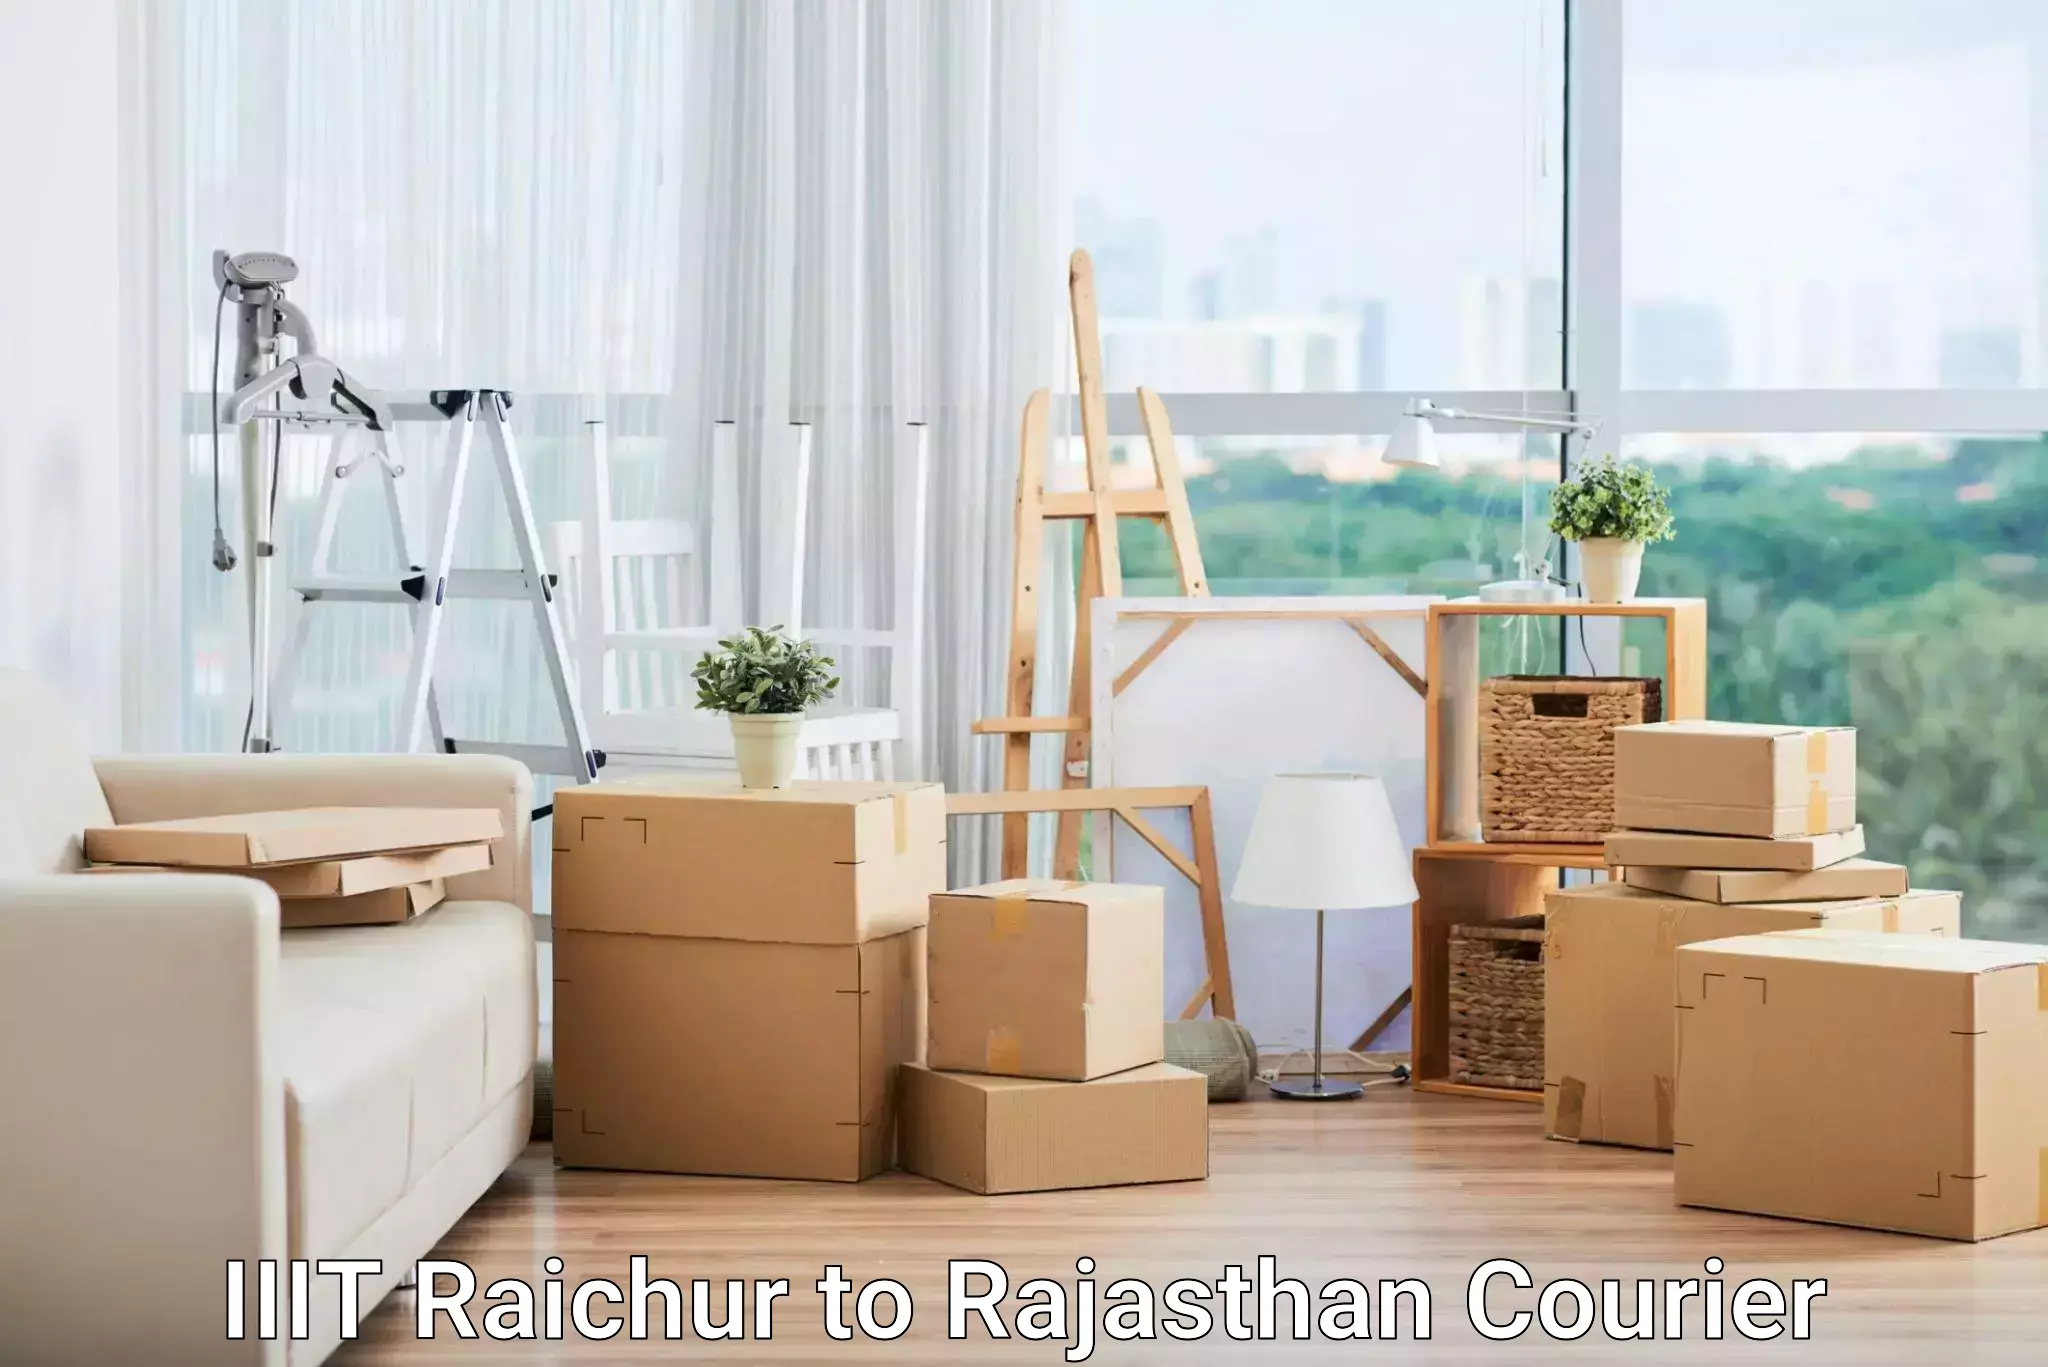 User-friendly delivery service IIIT Raichur to Piparcity